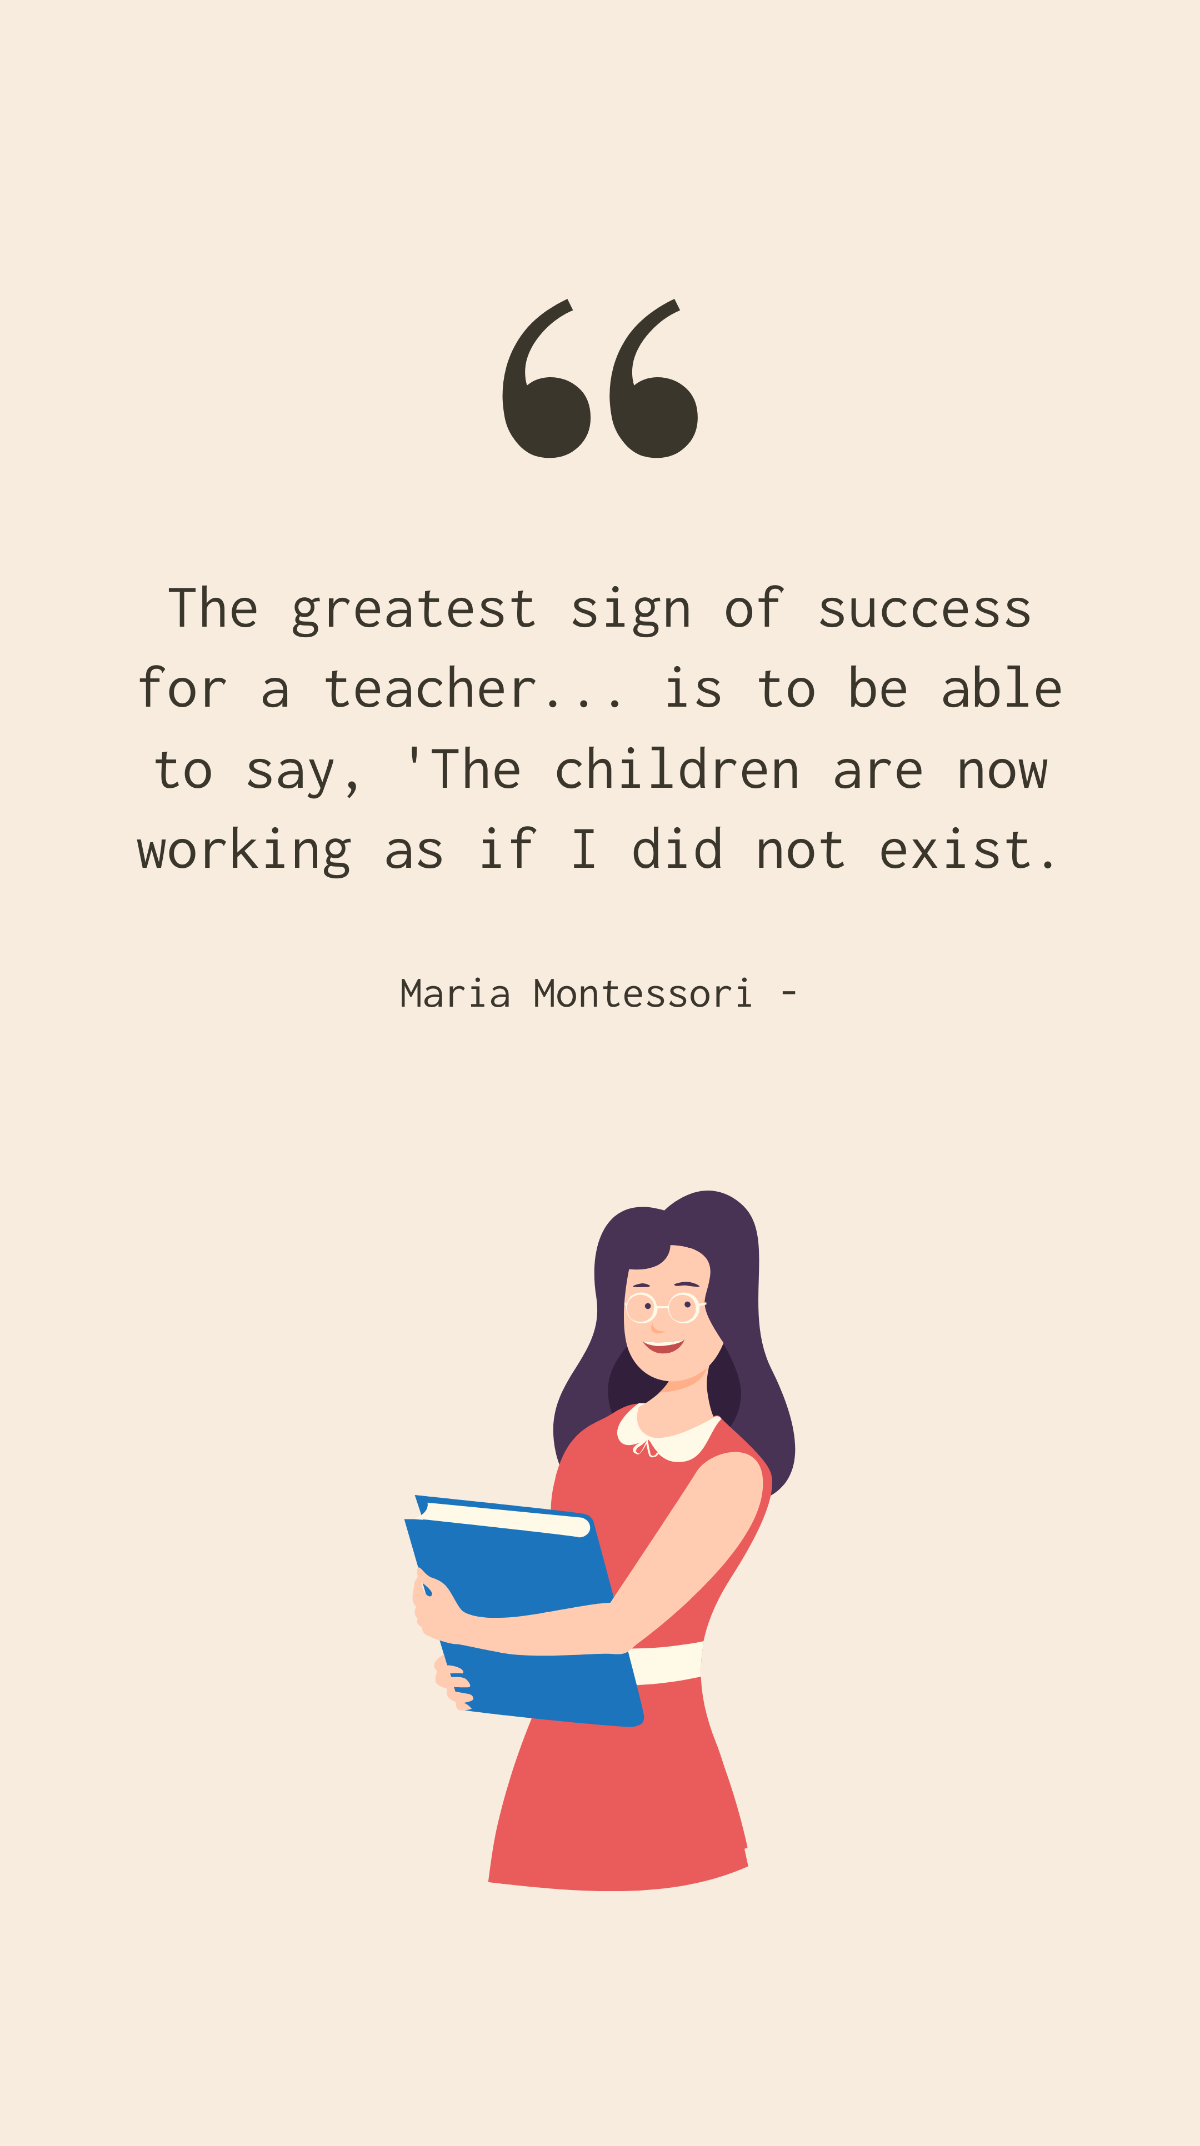 Maria Montessori - The greatest sign of success for a teacher... is to be able to say, 'The children are now working as if I did not exist.' Template